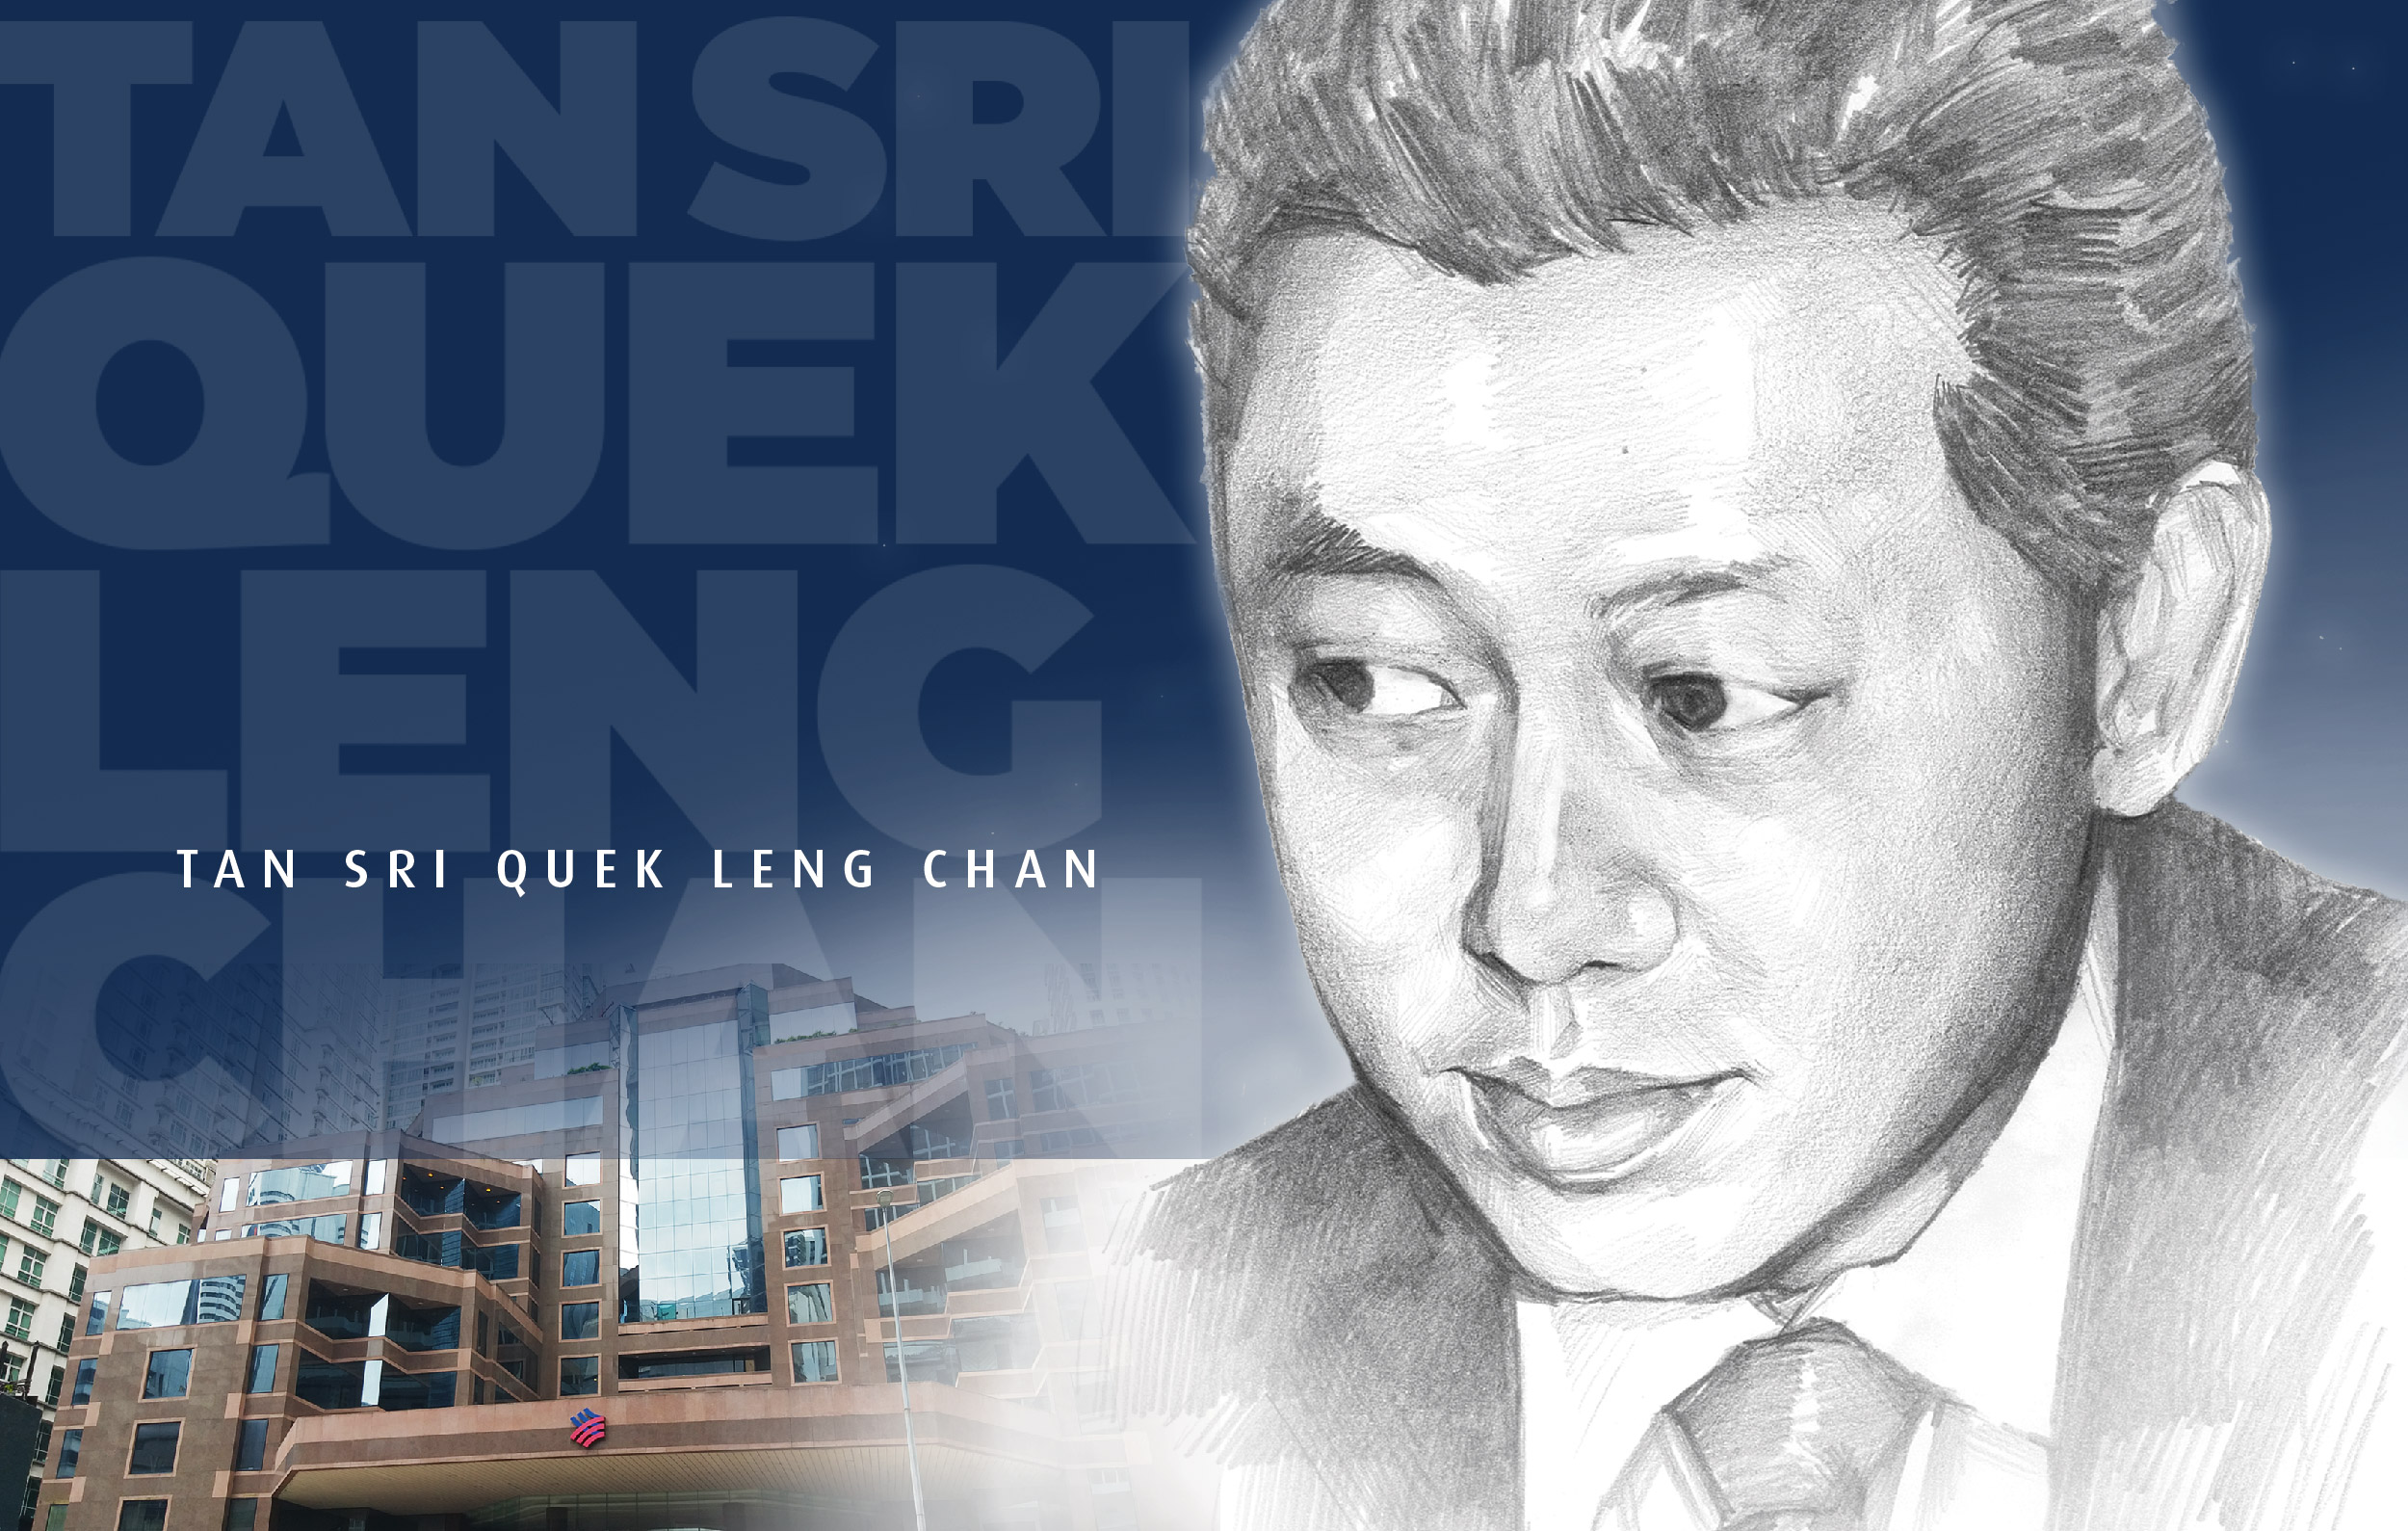 Tan Sri Quek Leng Chan was a young lawyer (28) when he crossed over to build the Malaysian Hong Leong group